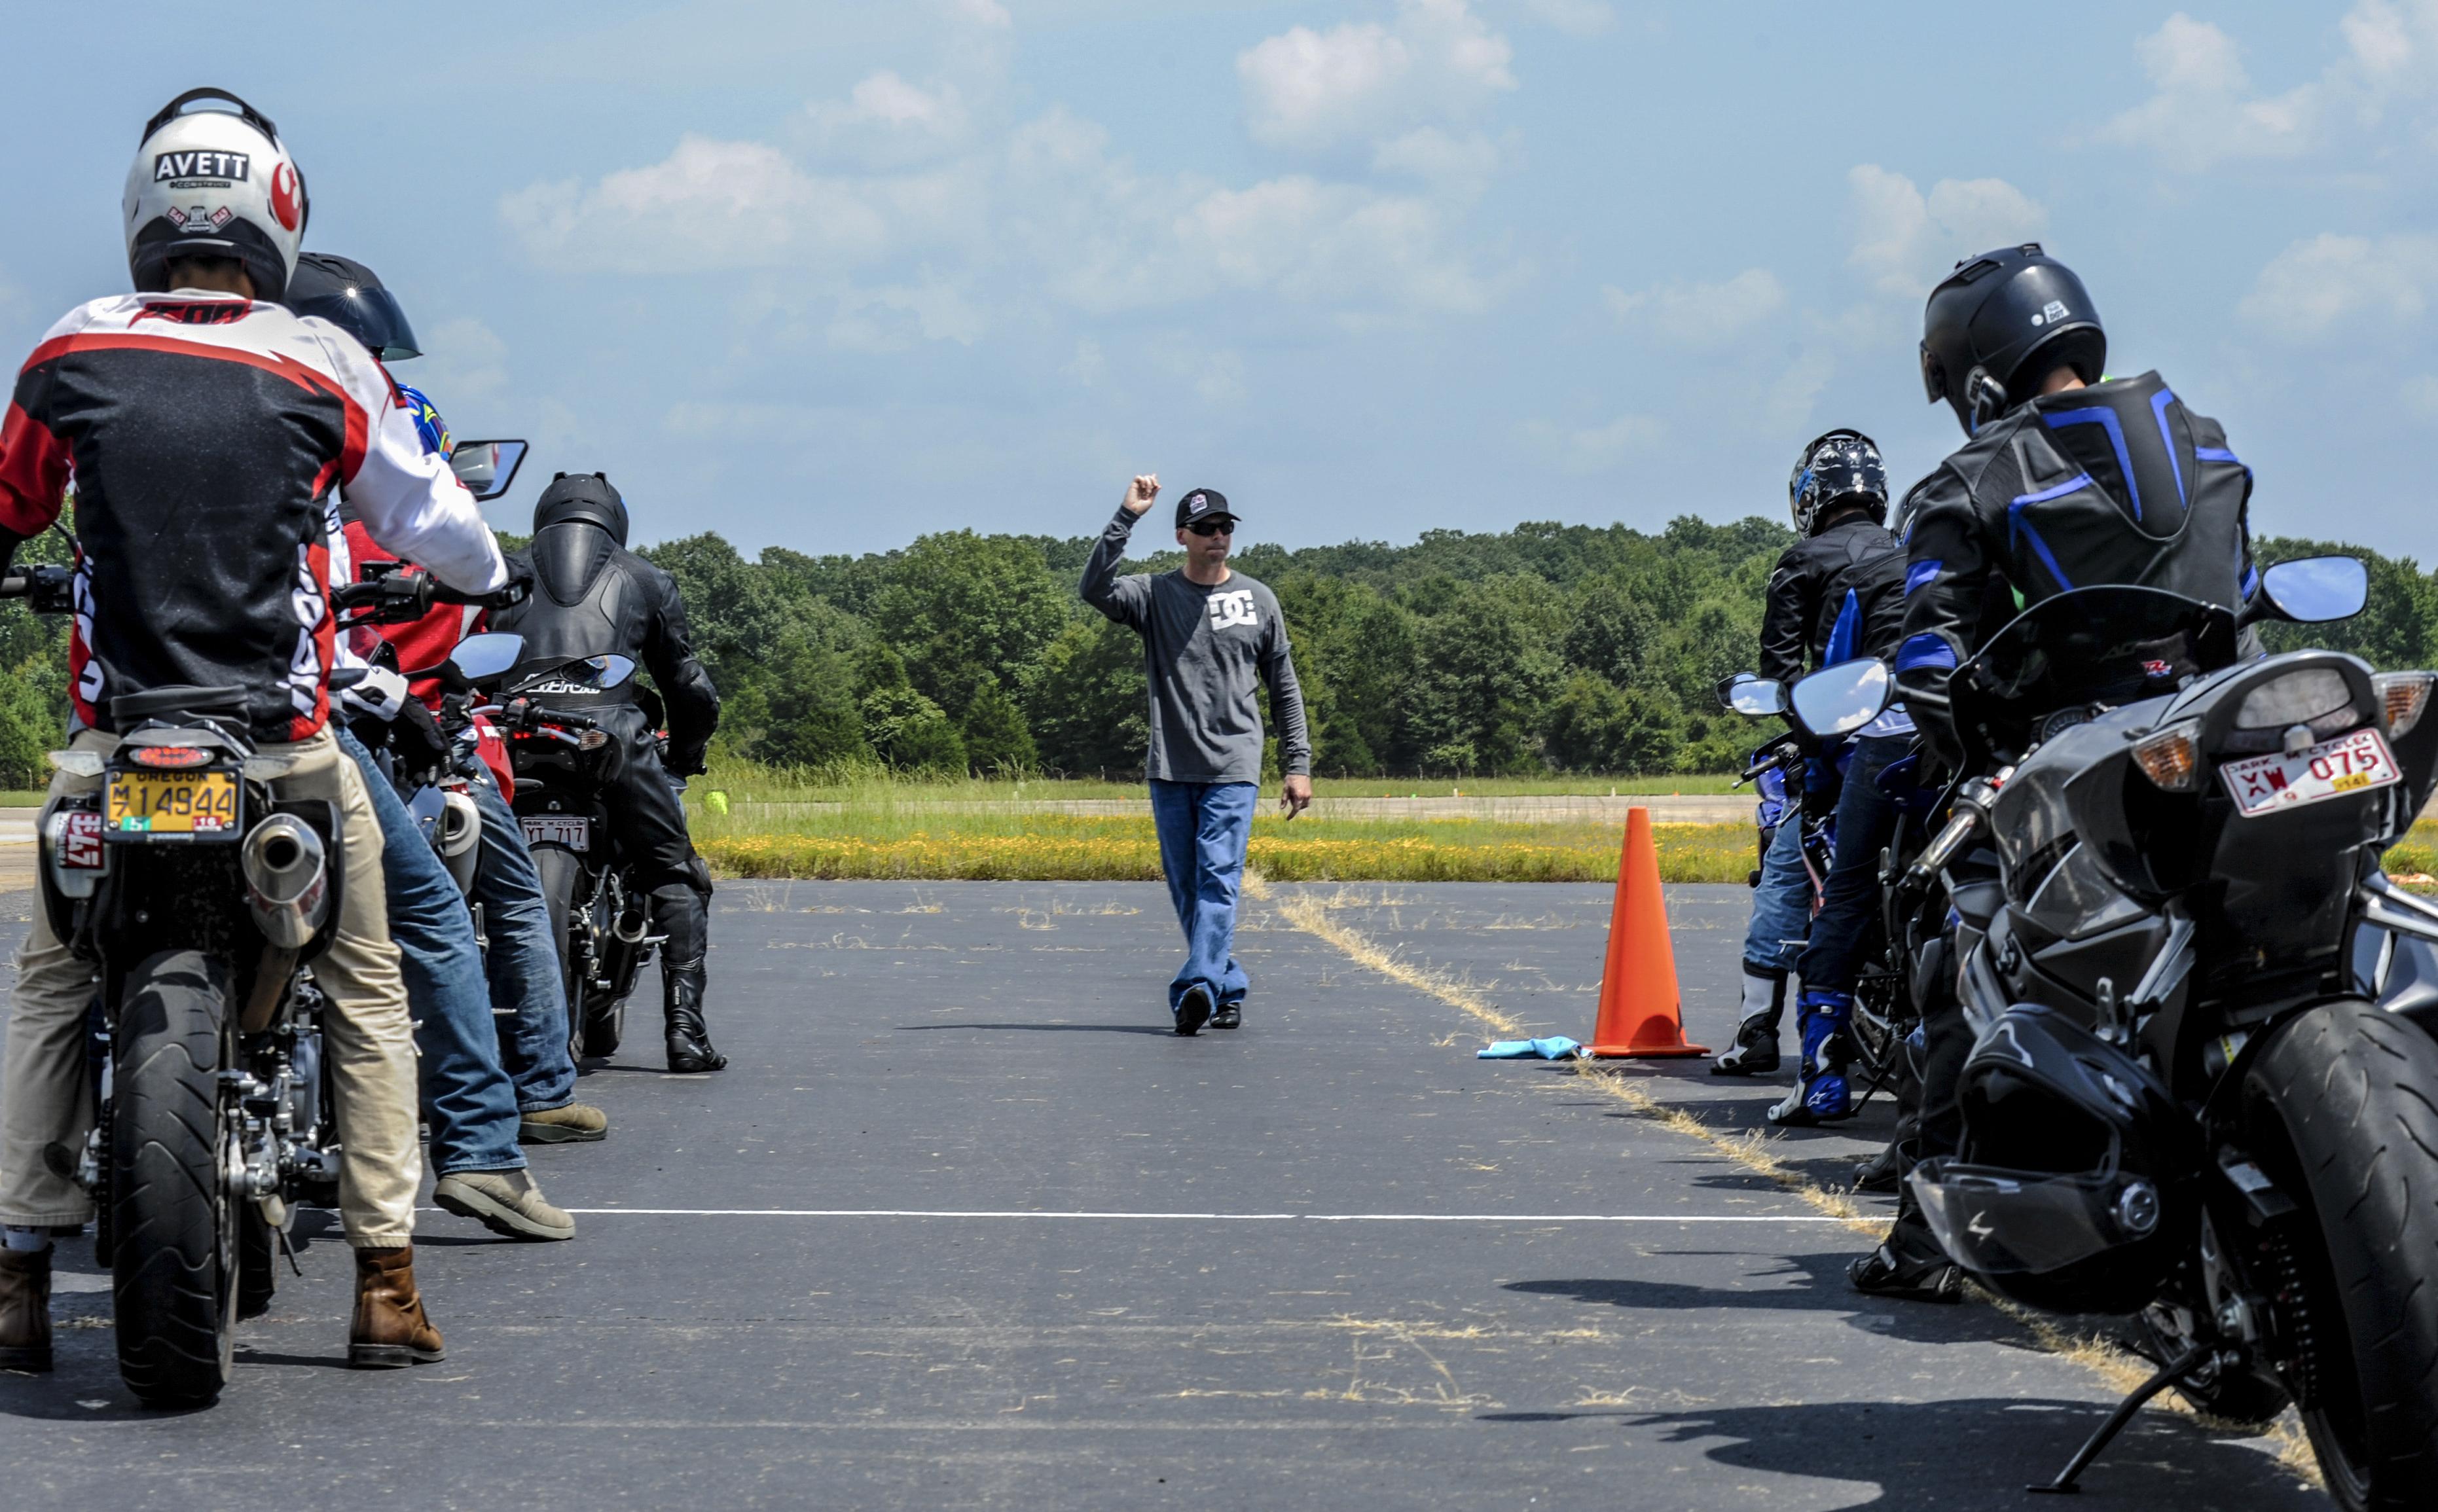 motorcycles and riders on street ready to take safety test with instructors in front giving direction